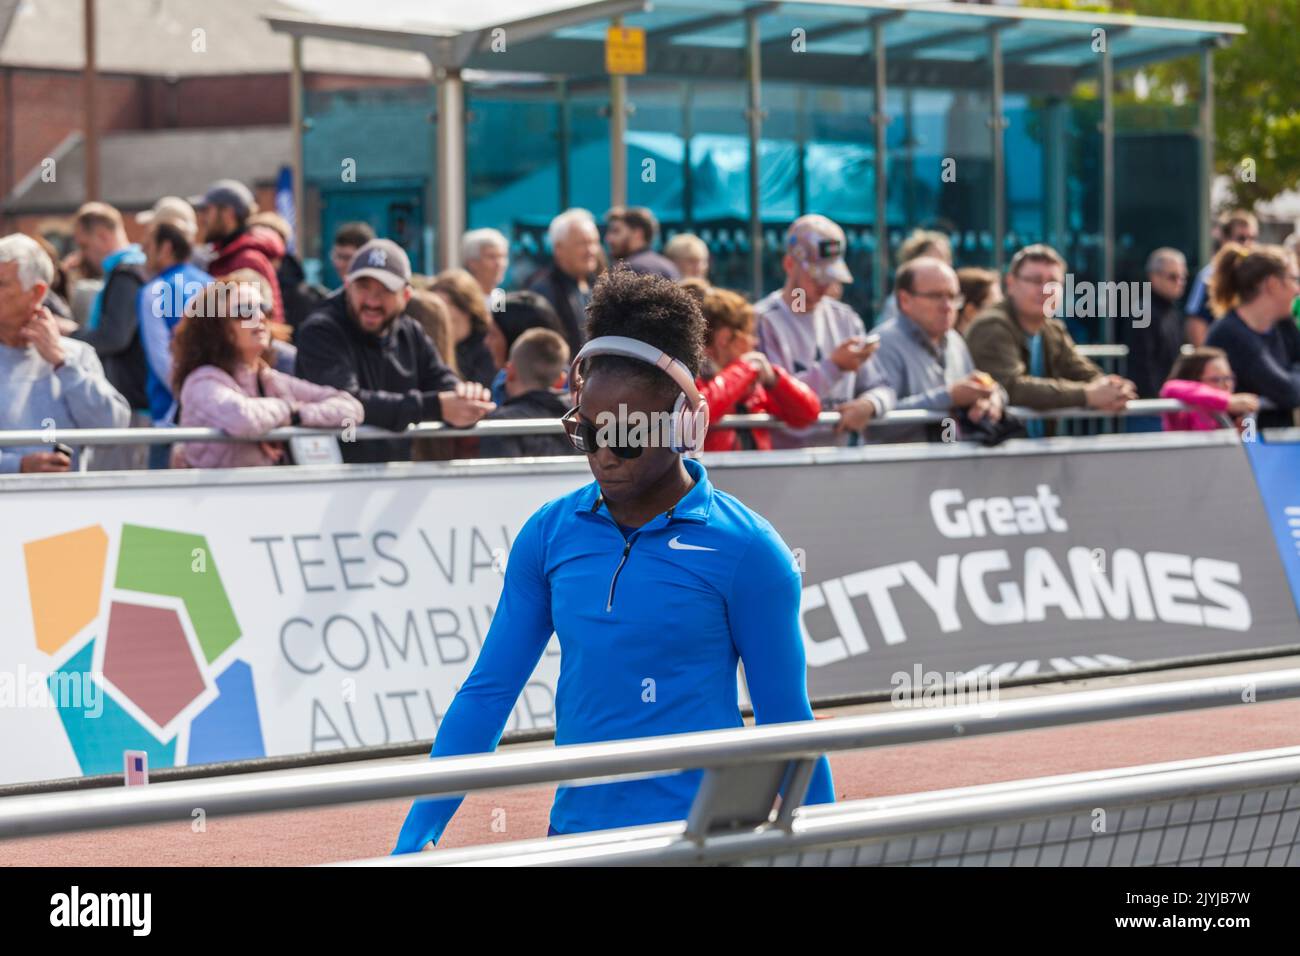 A female long jumper,Tianna Bartoletta, prepares for her jump in the Great North City Games were held in the High Street ,Stockton on Tees,England,UK Stock Photo